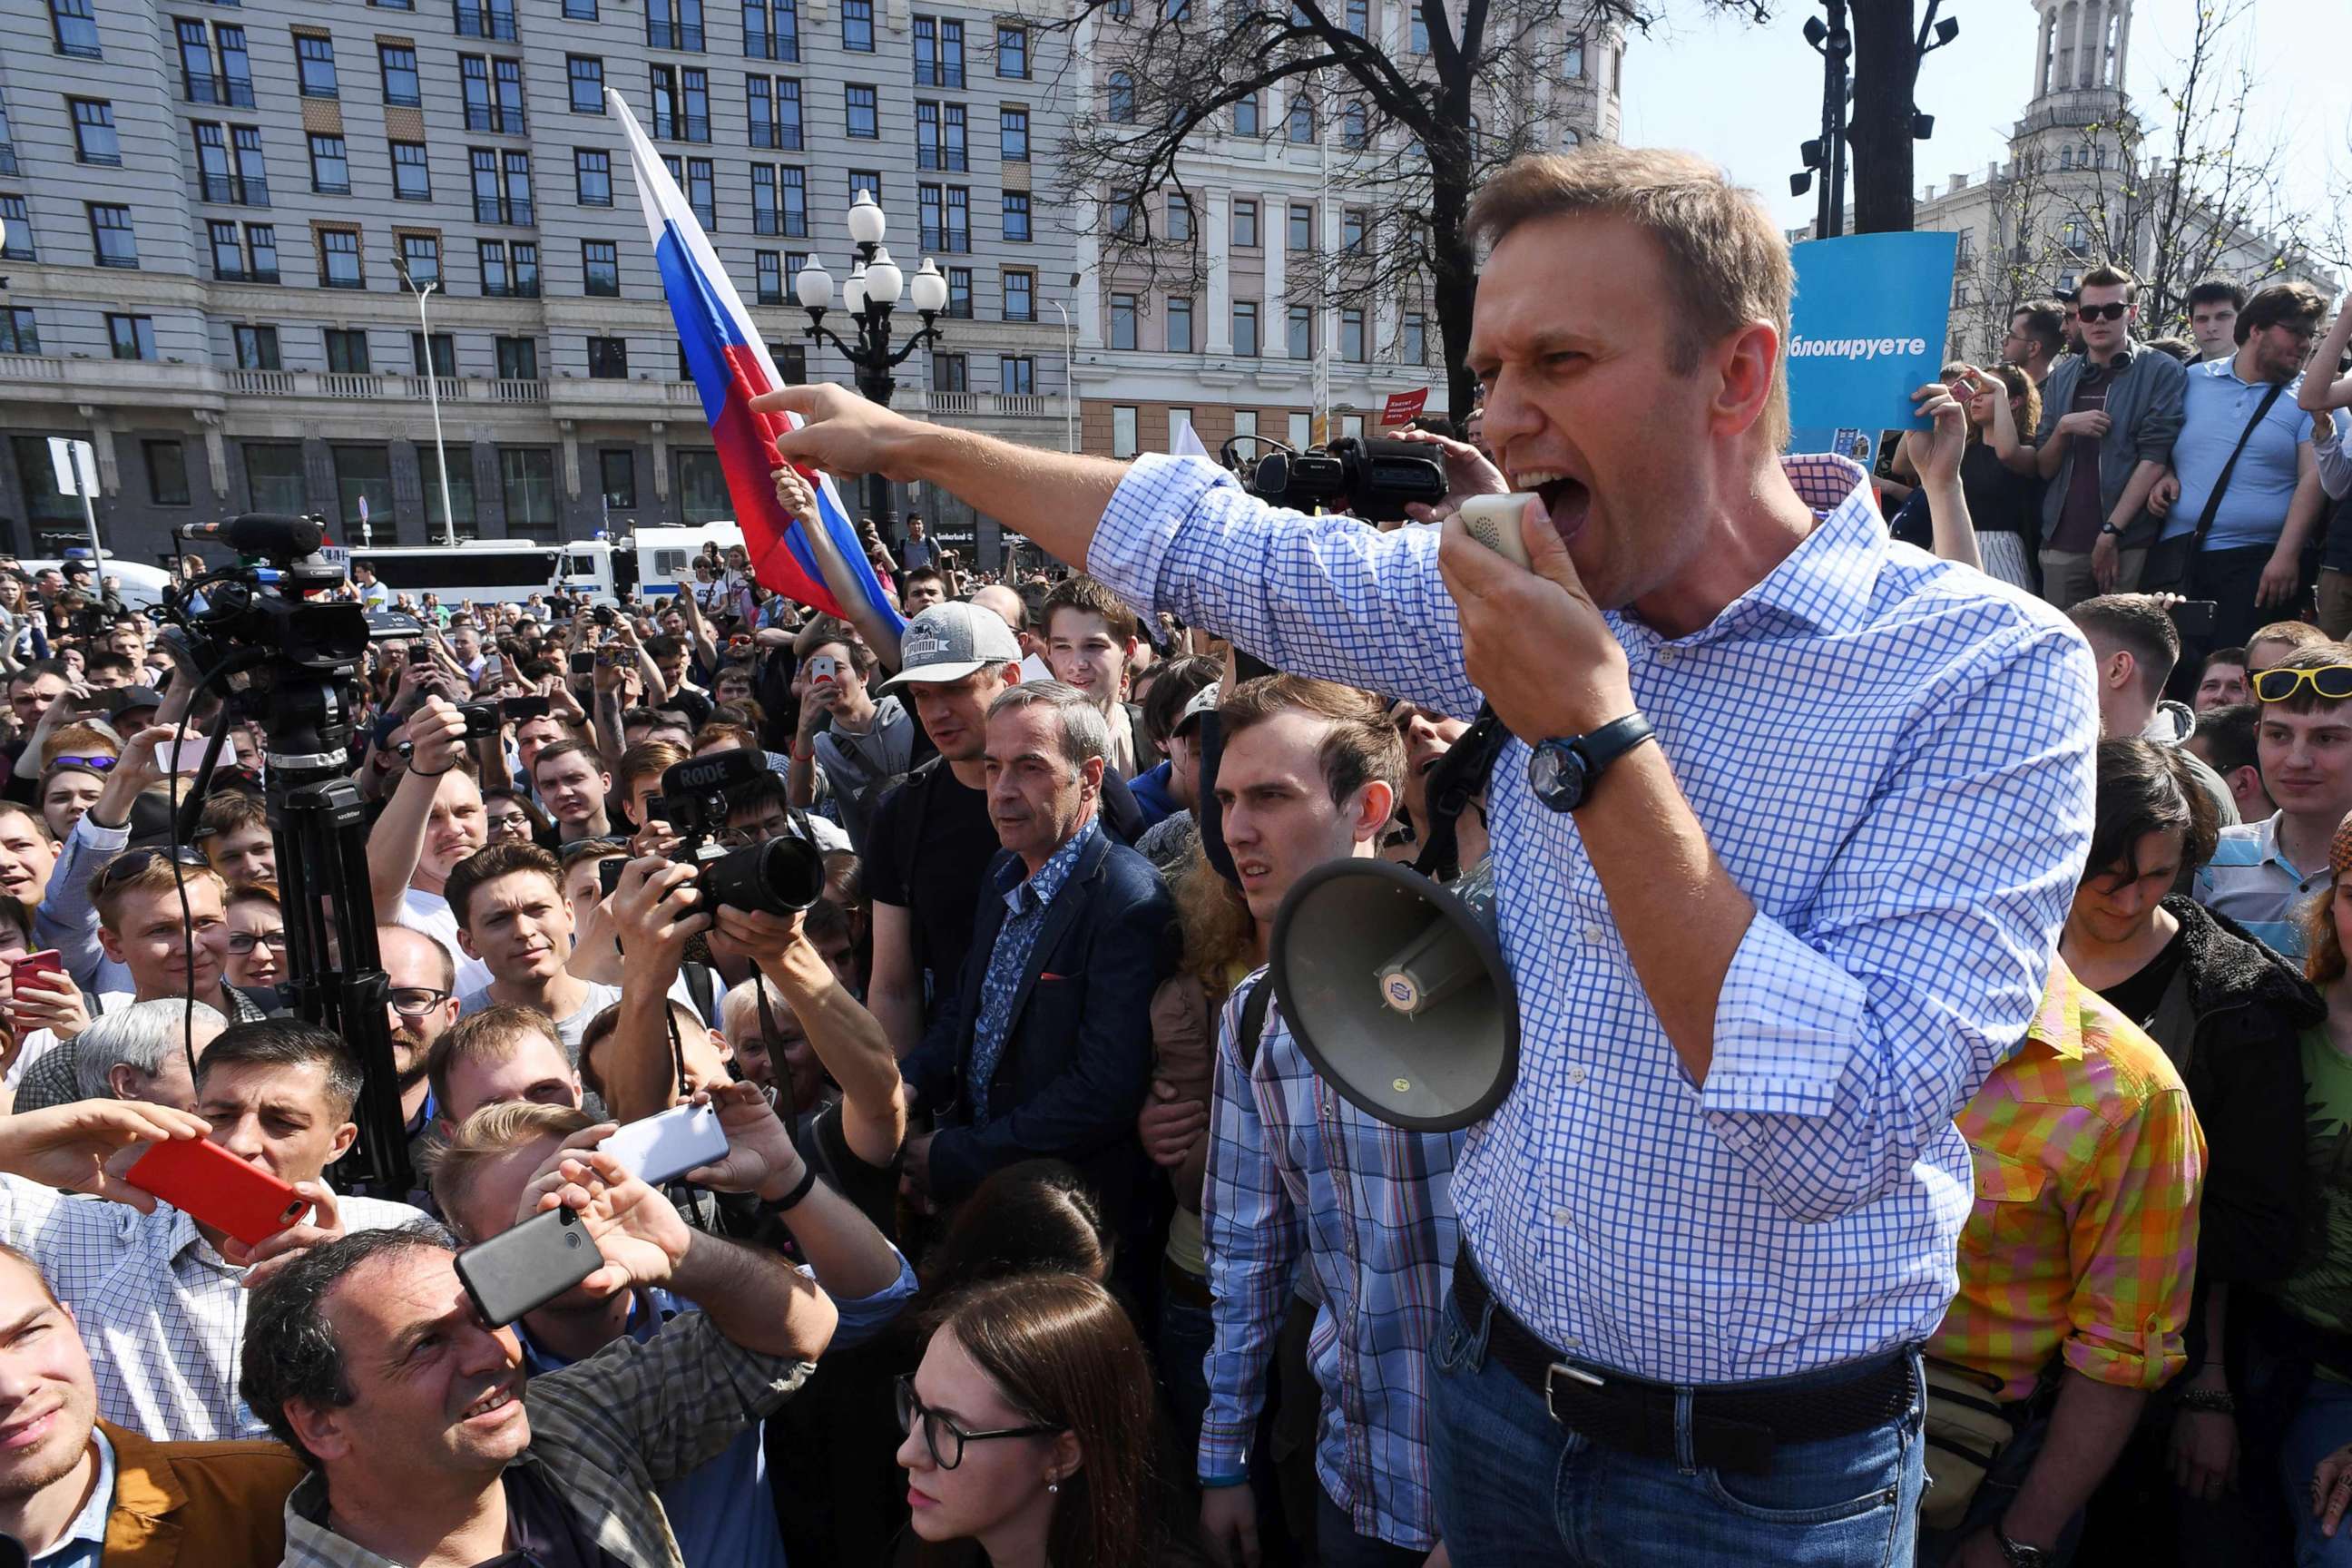 PHOTO: Russian opposition leader Alexei Navalny addresses supporters during an unauthorized anti-Putin rally on May 5, 2018 in Moscow, two days ahead of Vladimir Putin's inauguration for a fourth Kremlin term.